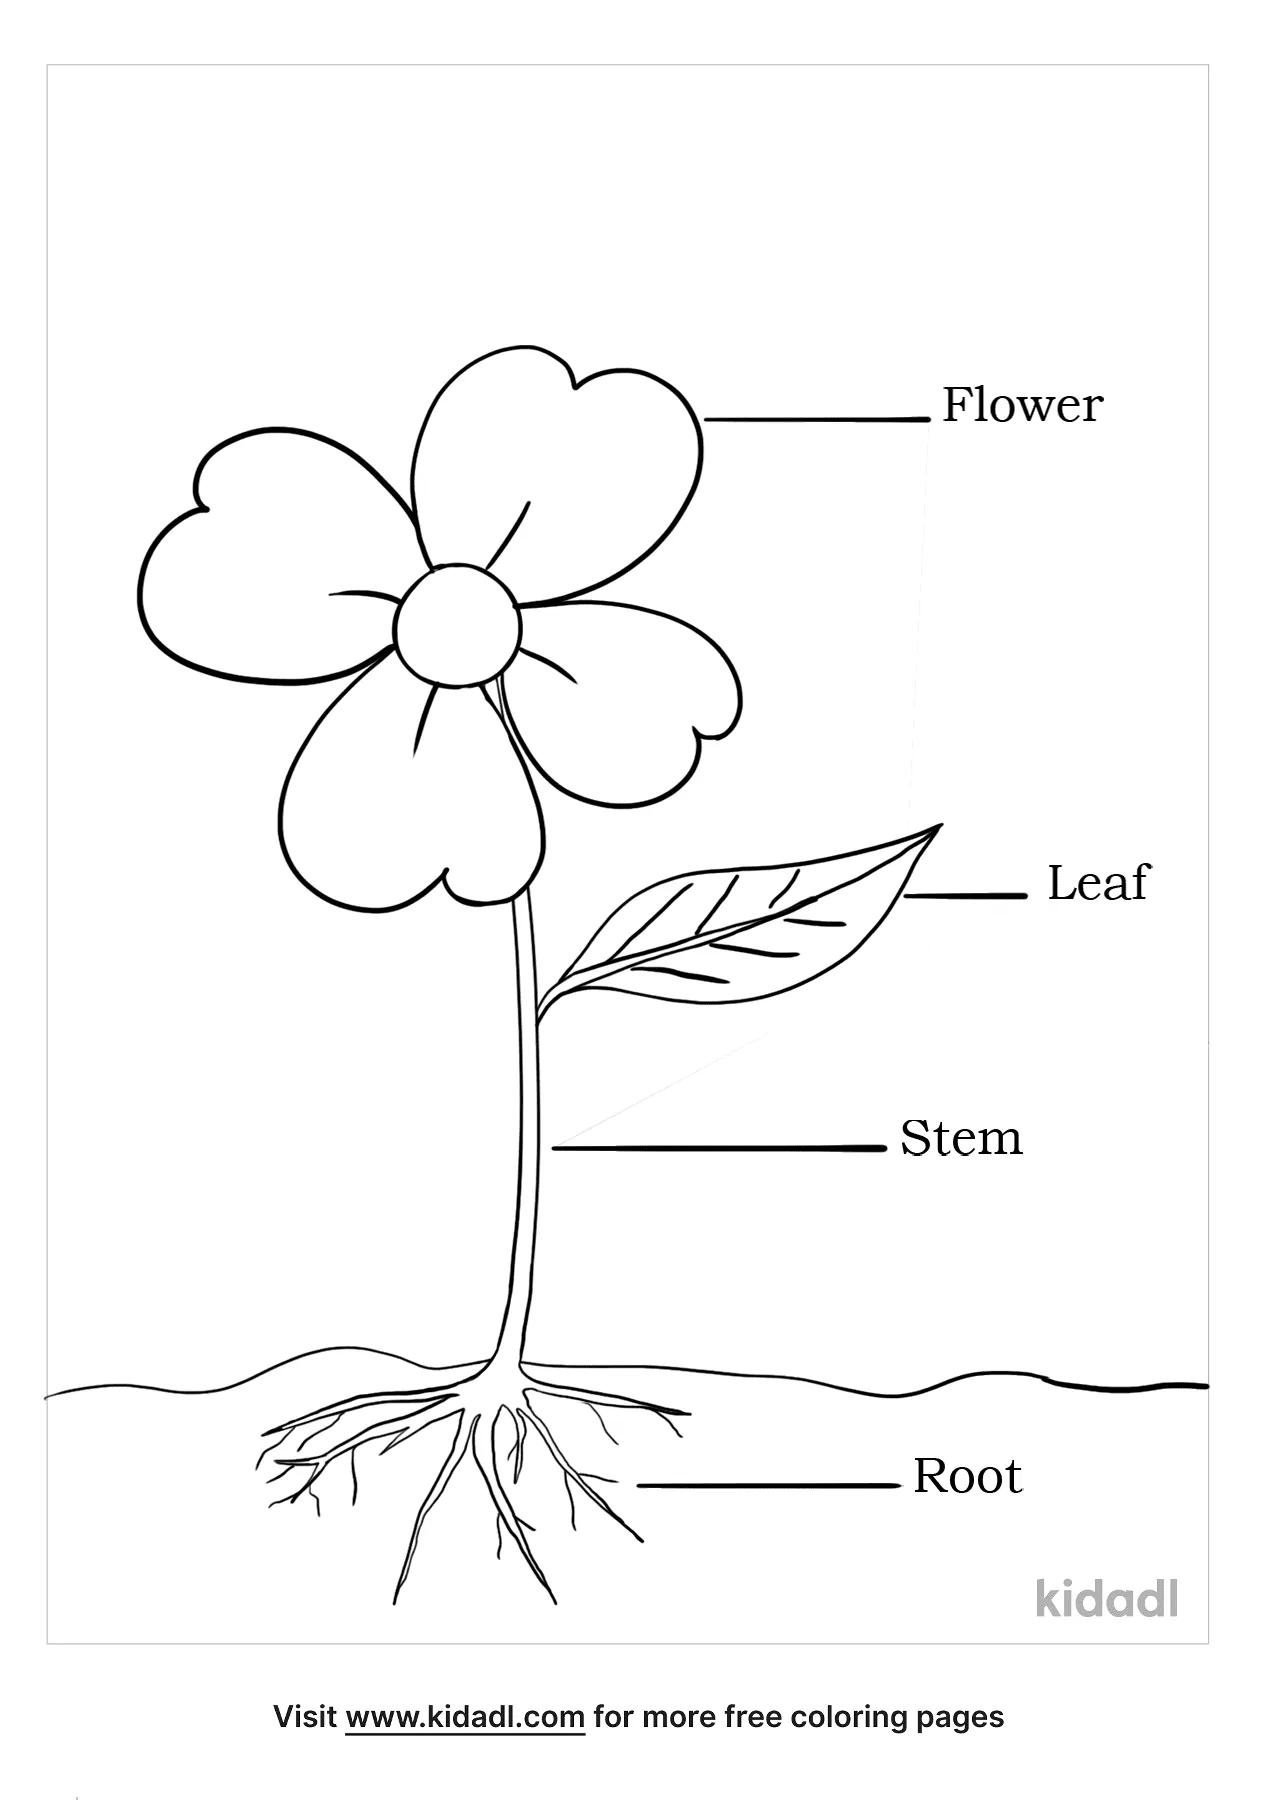 Parts Of The Plants Coloring Pages